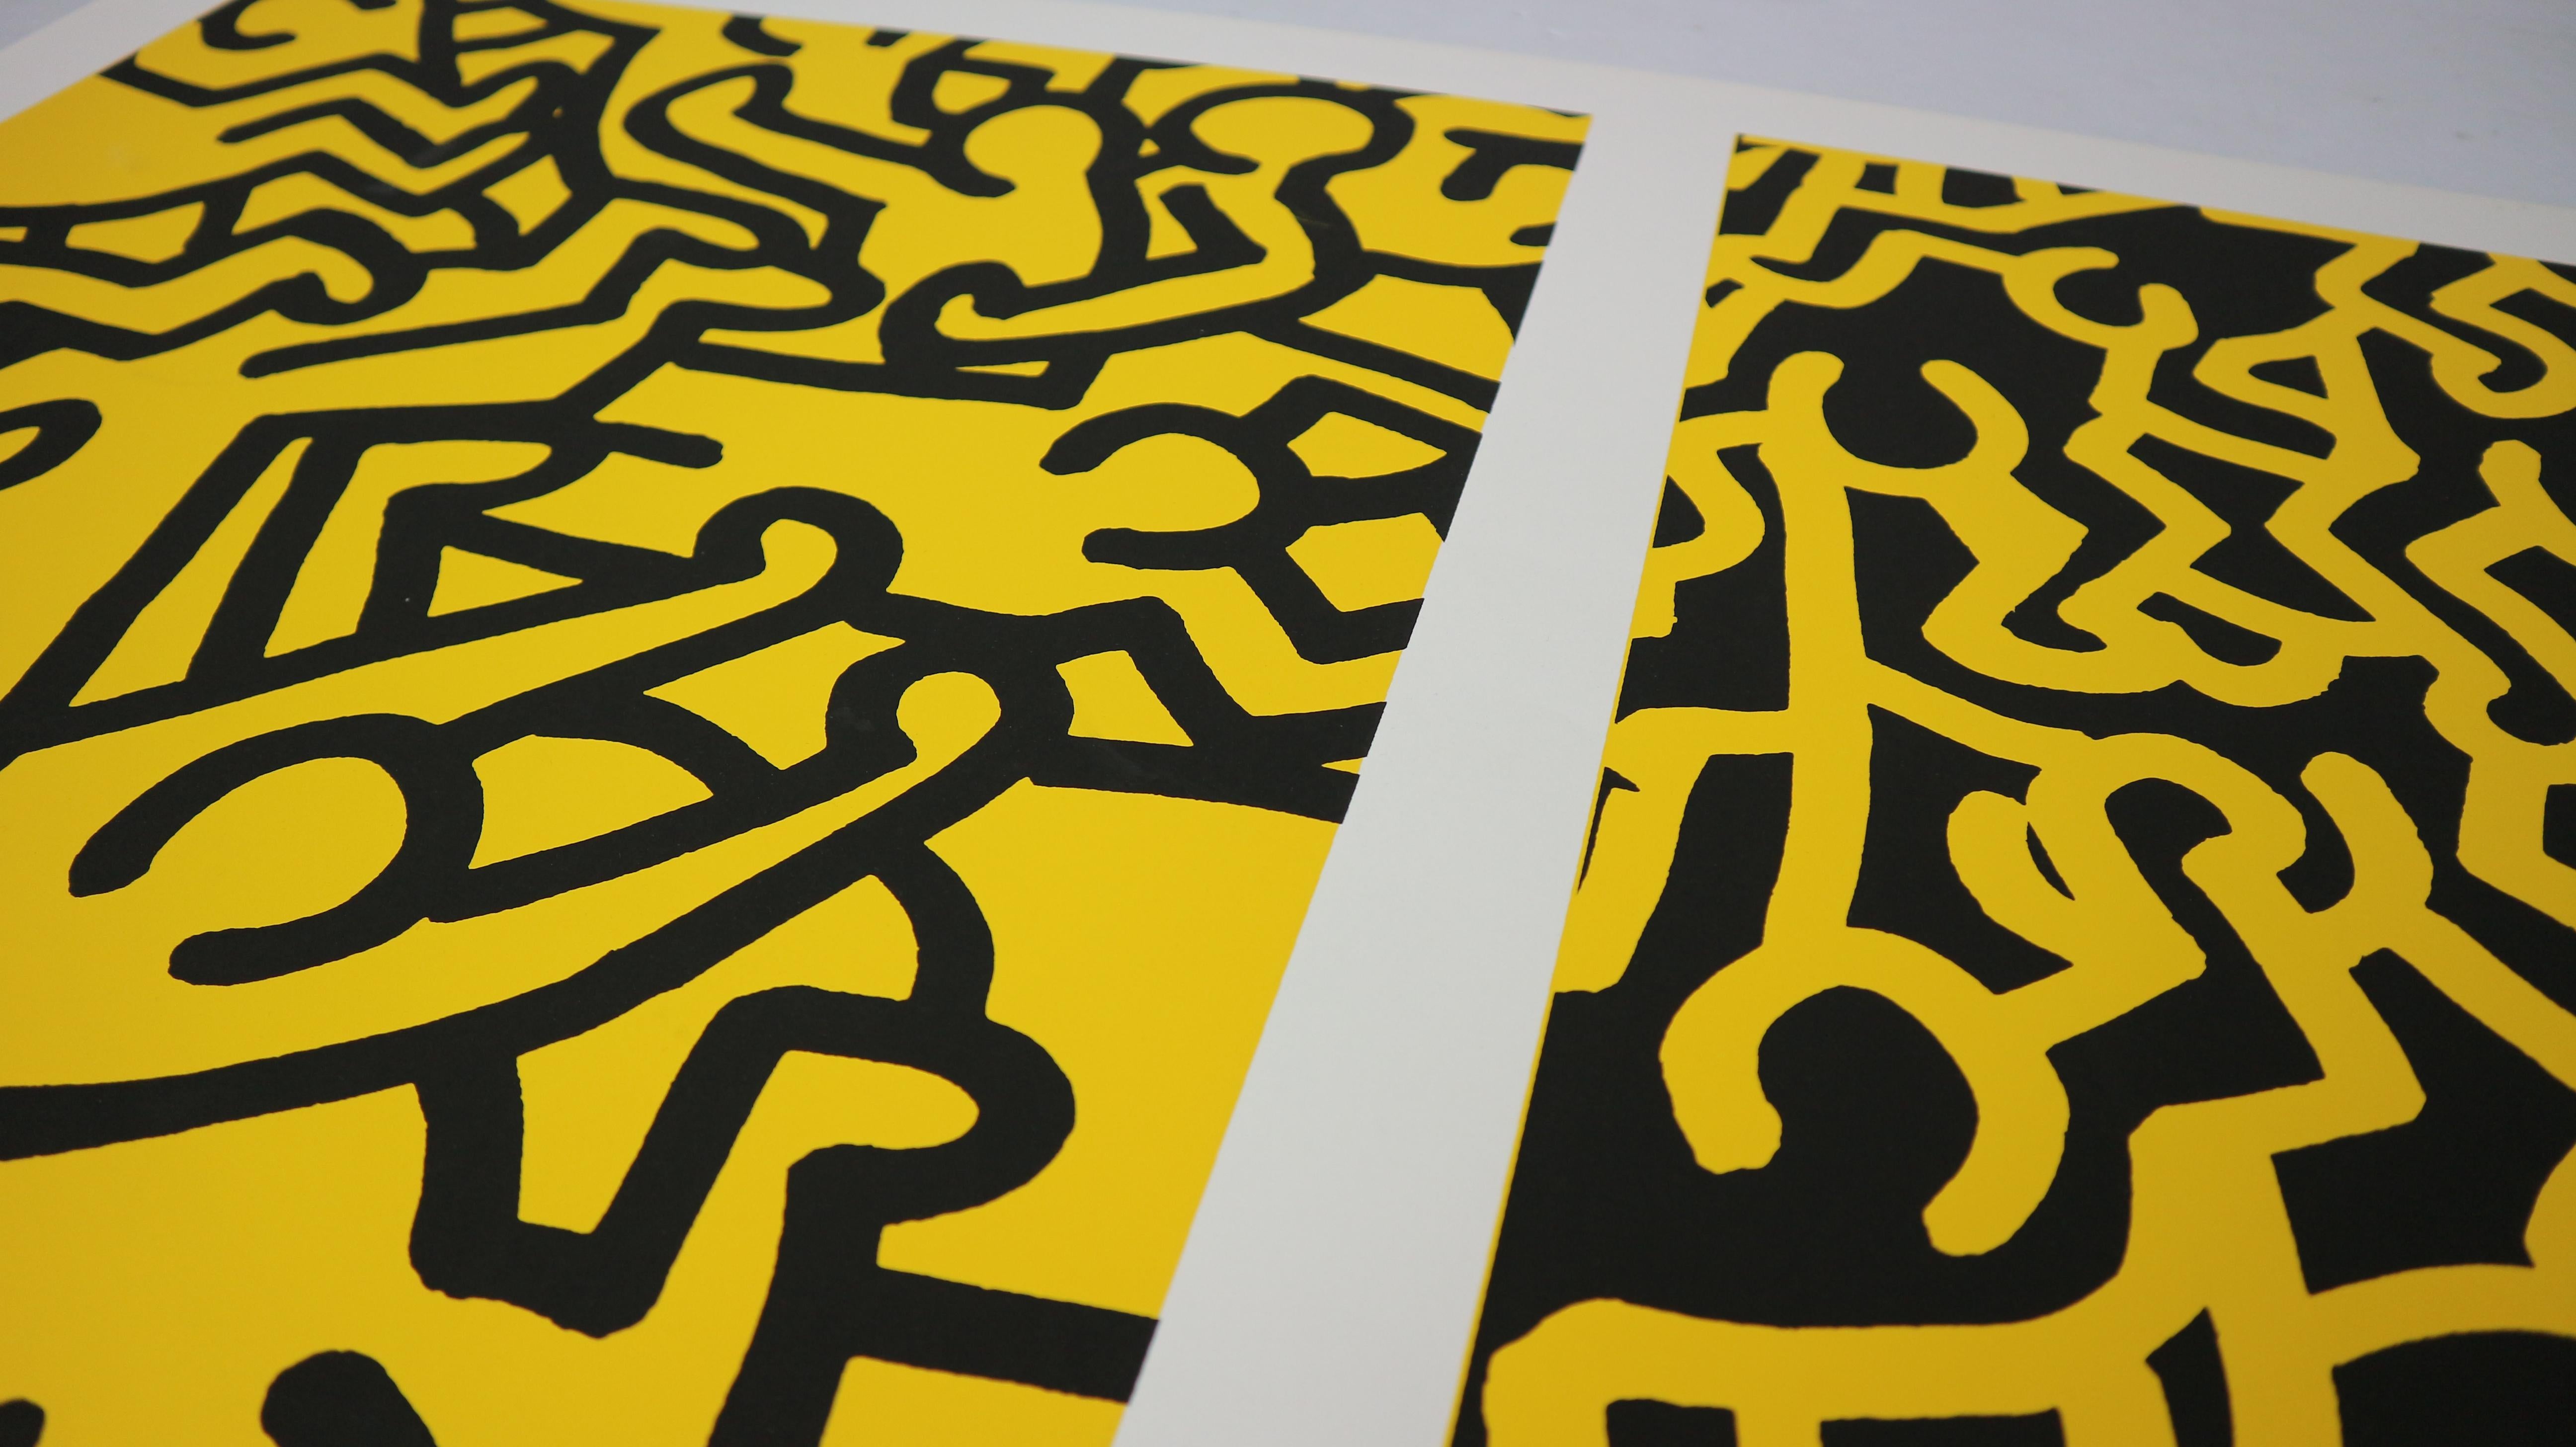 Special Edition silkscreen by Keith Haring 